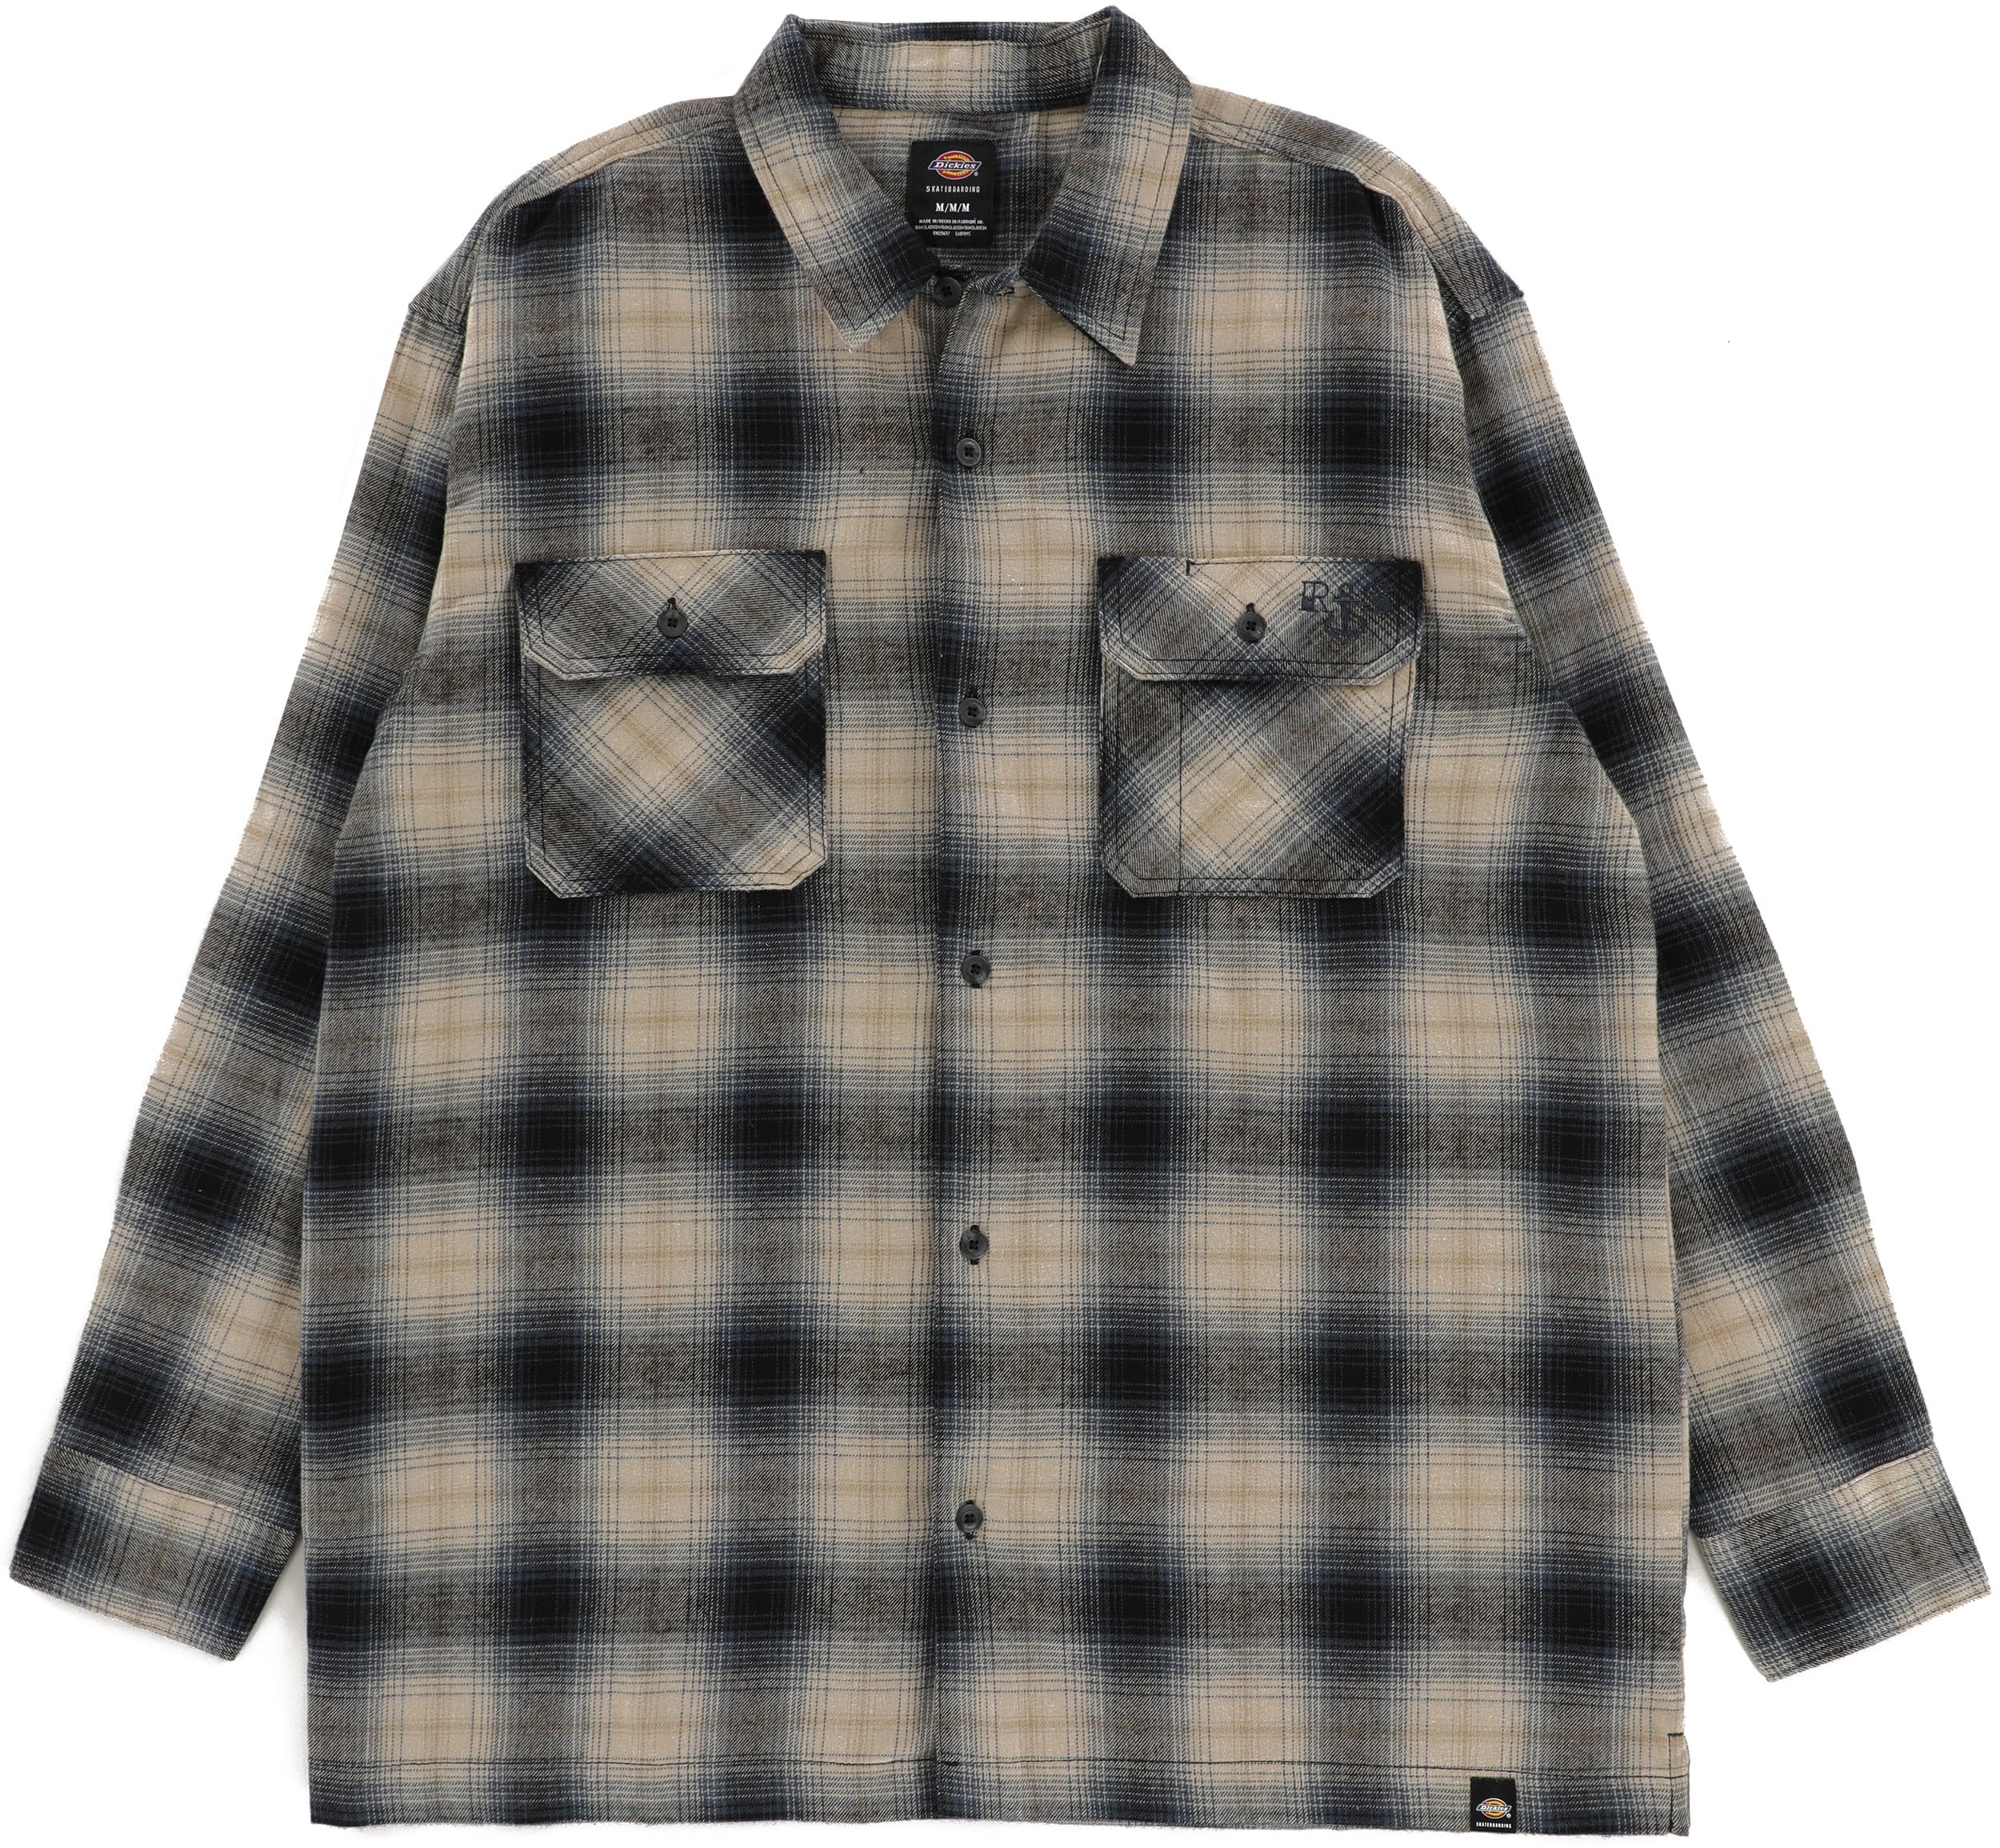 Dickies Ronnie Sandoval Flannel Shirt - blue ombre plaid | Tactics